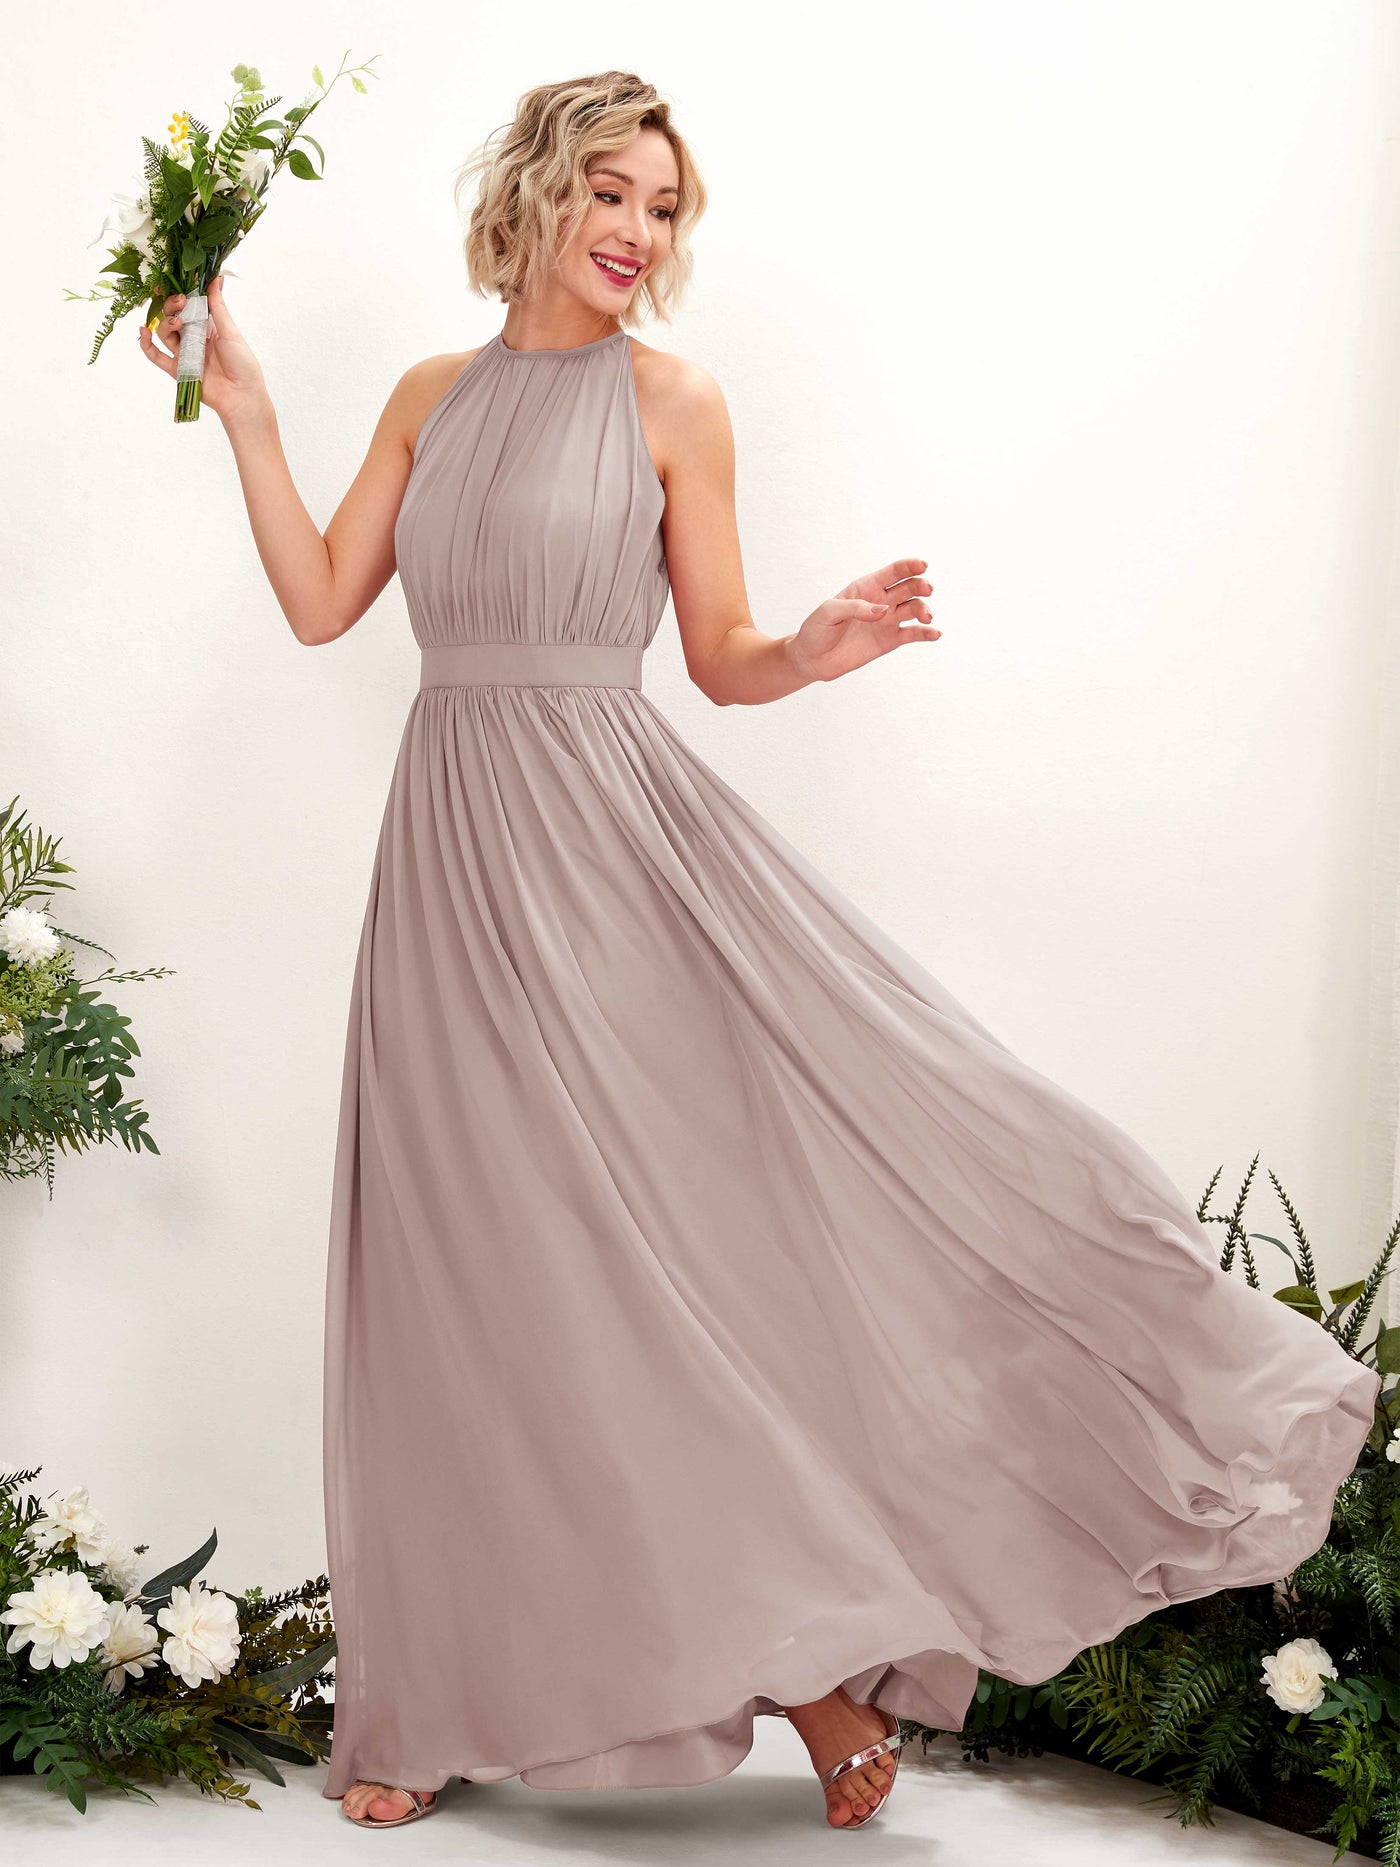 Taupe Bridesmaid Dresses Bridesmaid Dress A-line Chiffon Halter Full Length Sleeveless Wedding Party Dress (81223124)#color_taupe